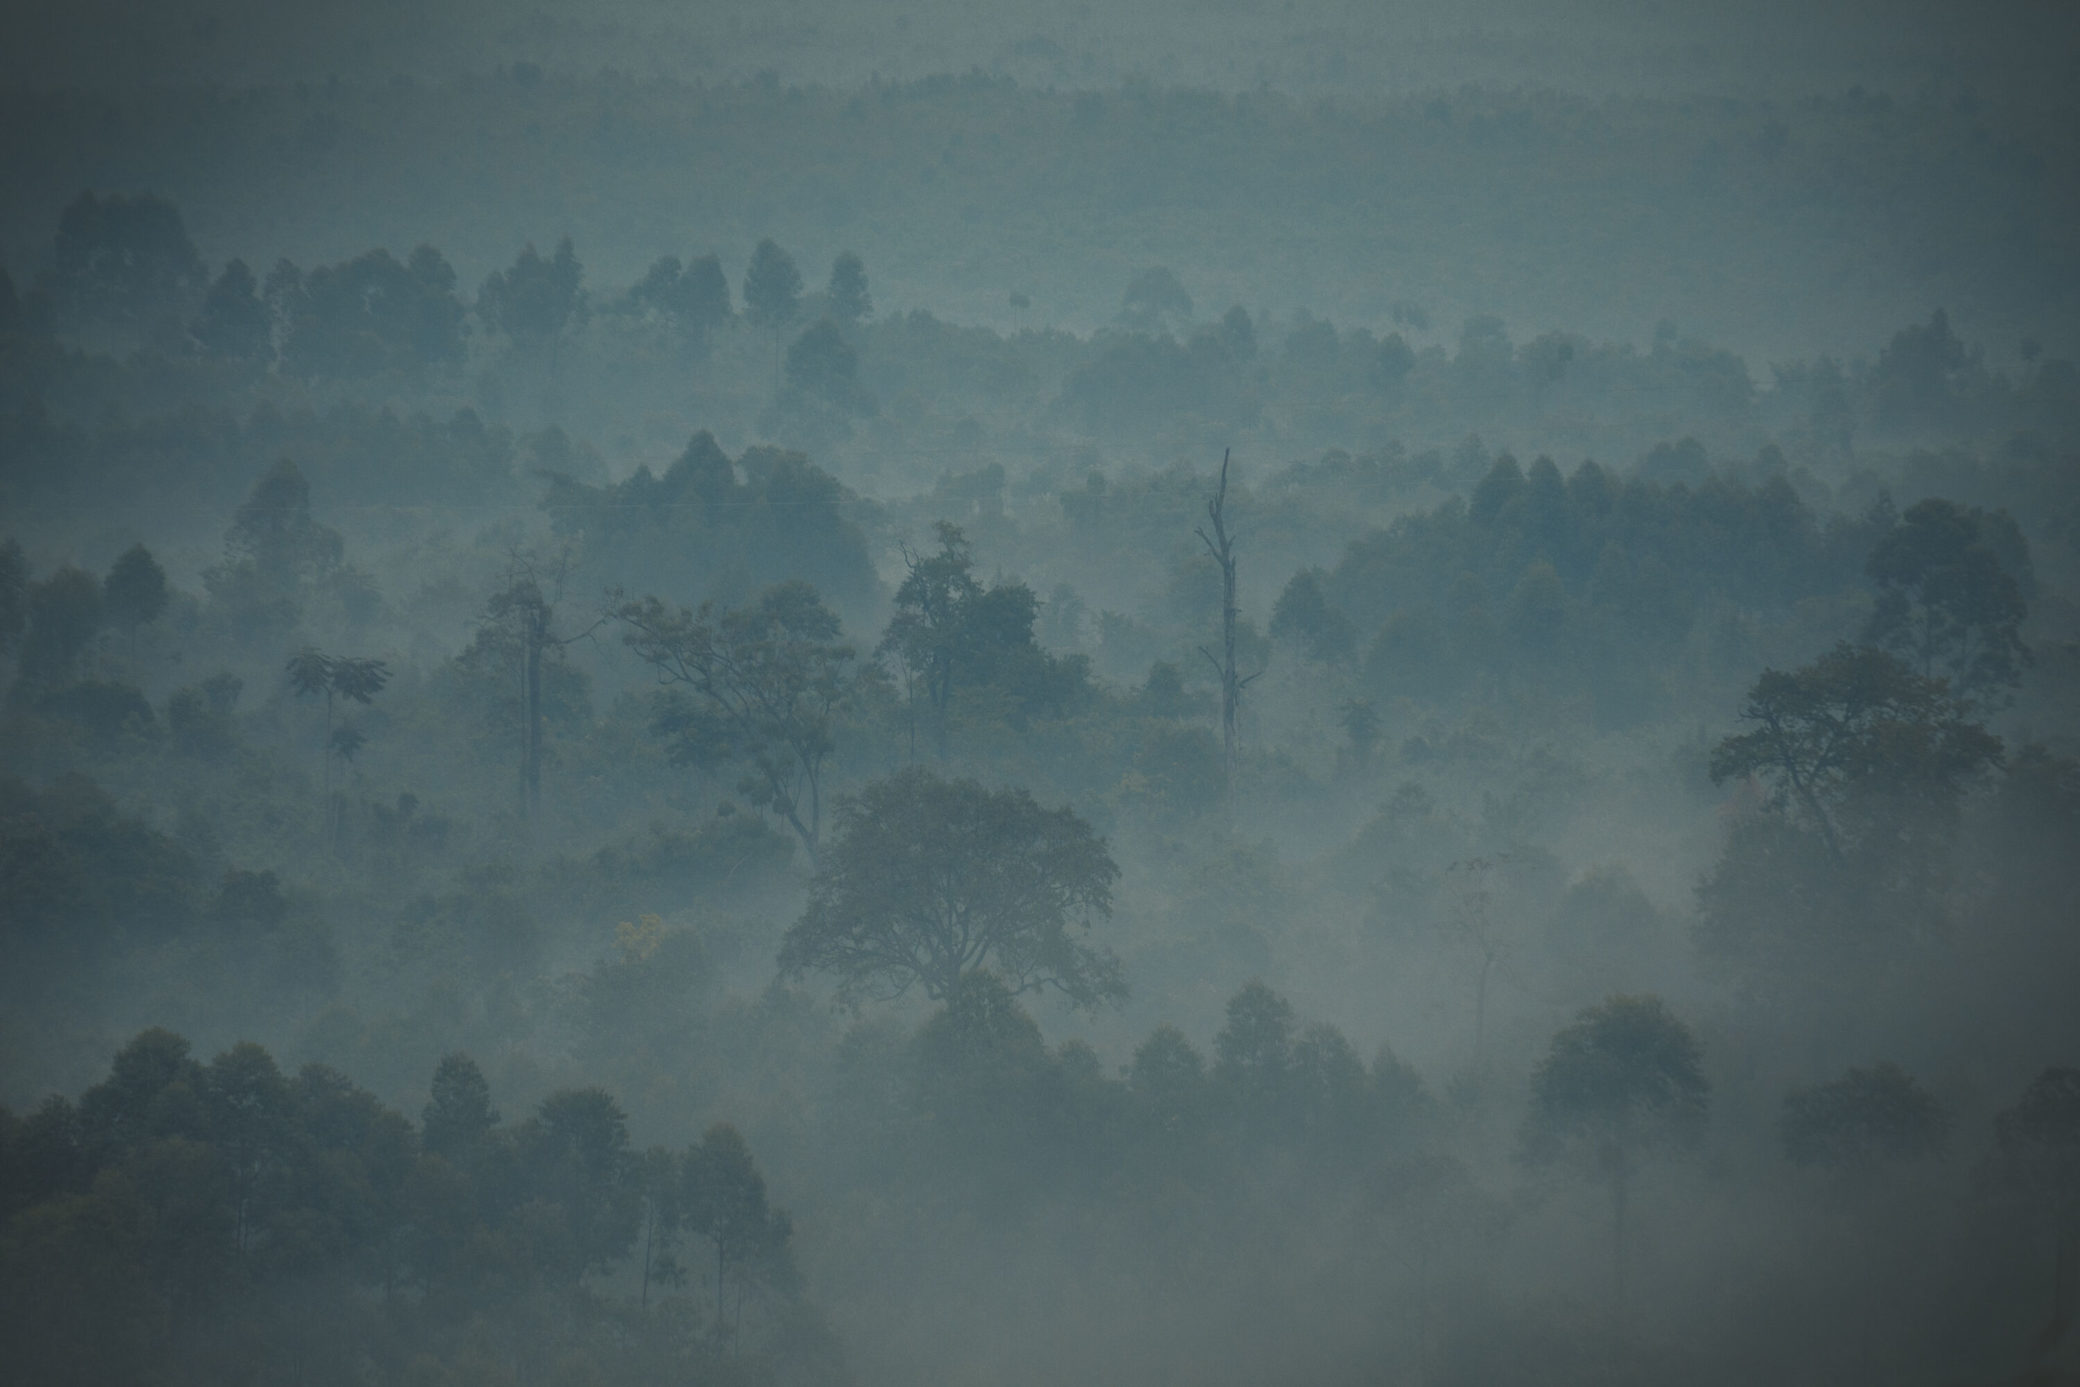 An image of the early morning mists over the raiforest